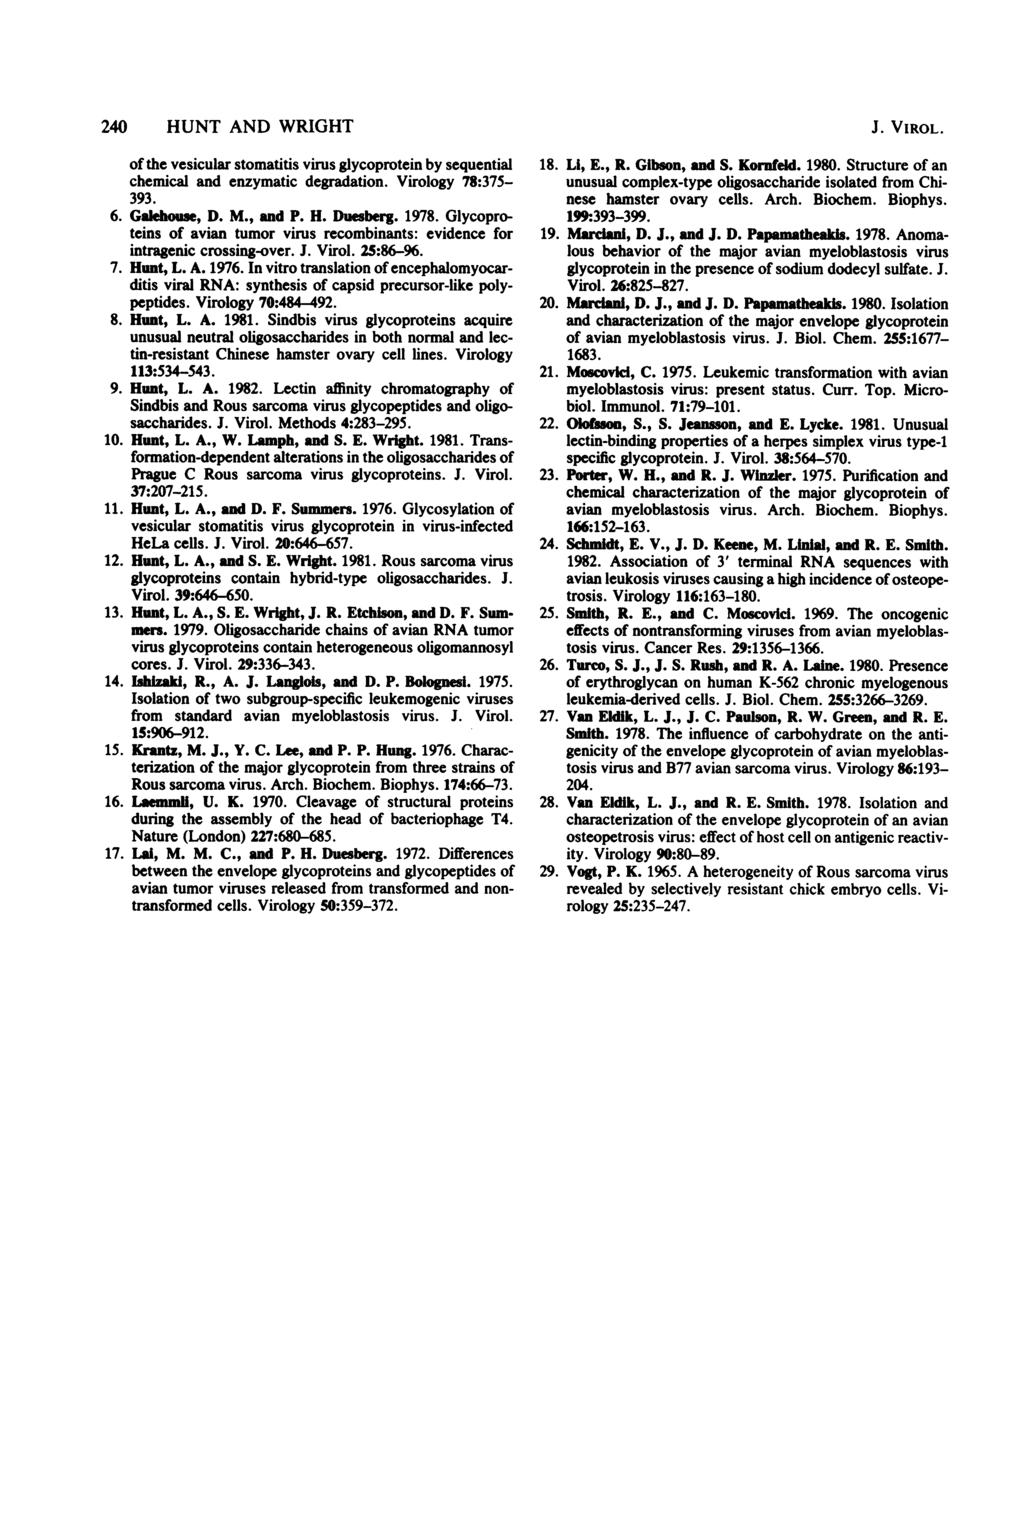 240 HUNT AND WRIGHT of the vesicular stomatitis virus glycoprotein by sequential chemical and enzymatic degradation. Virology 78:375-393. 6. Galhouse, D. M., and P. H. Duesberg. 1978.